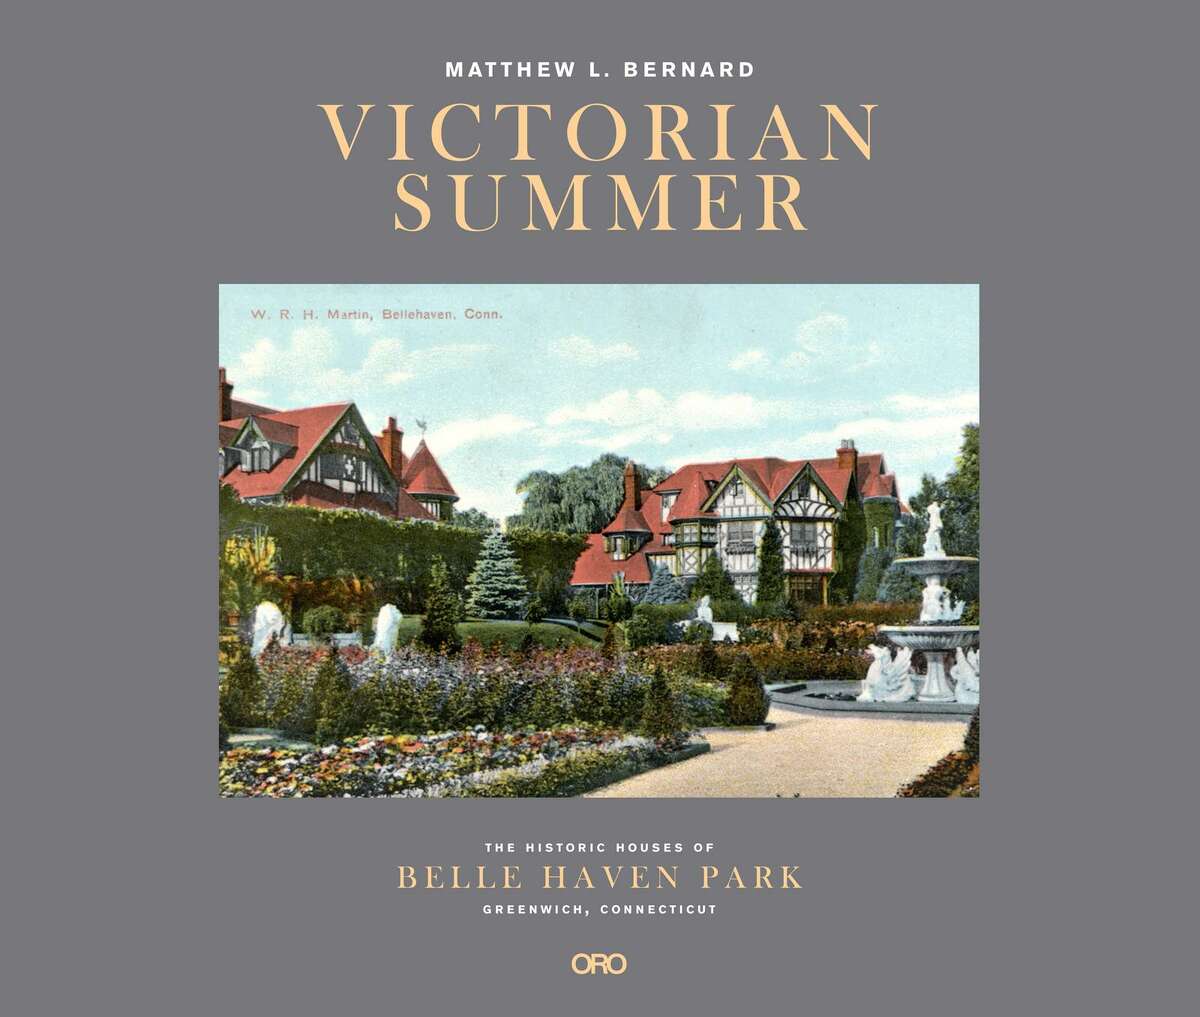 The cover of "Victorian Summer: The Historic Houses of Belle Haven Park, Greenwich, Connecticut" writtne by Matthew Bernard.